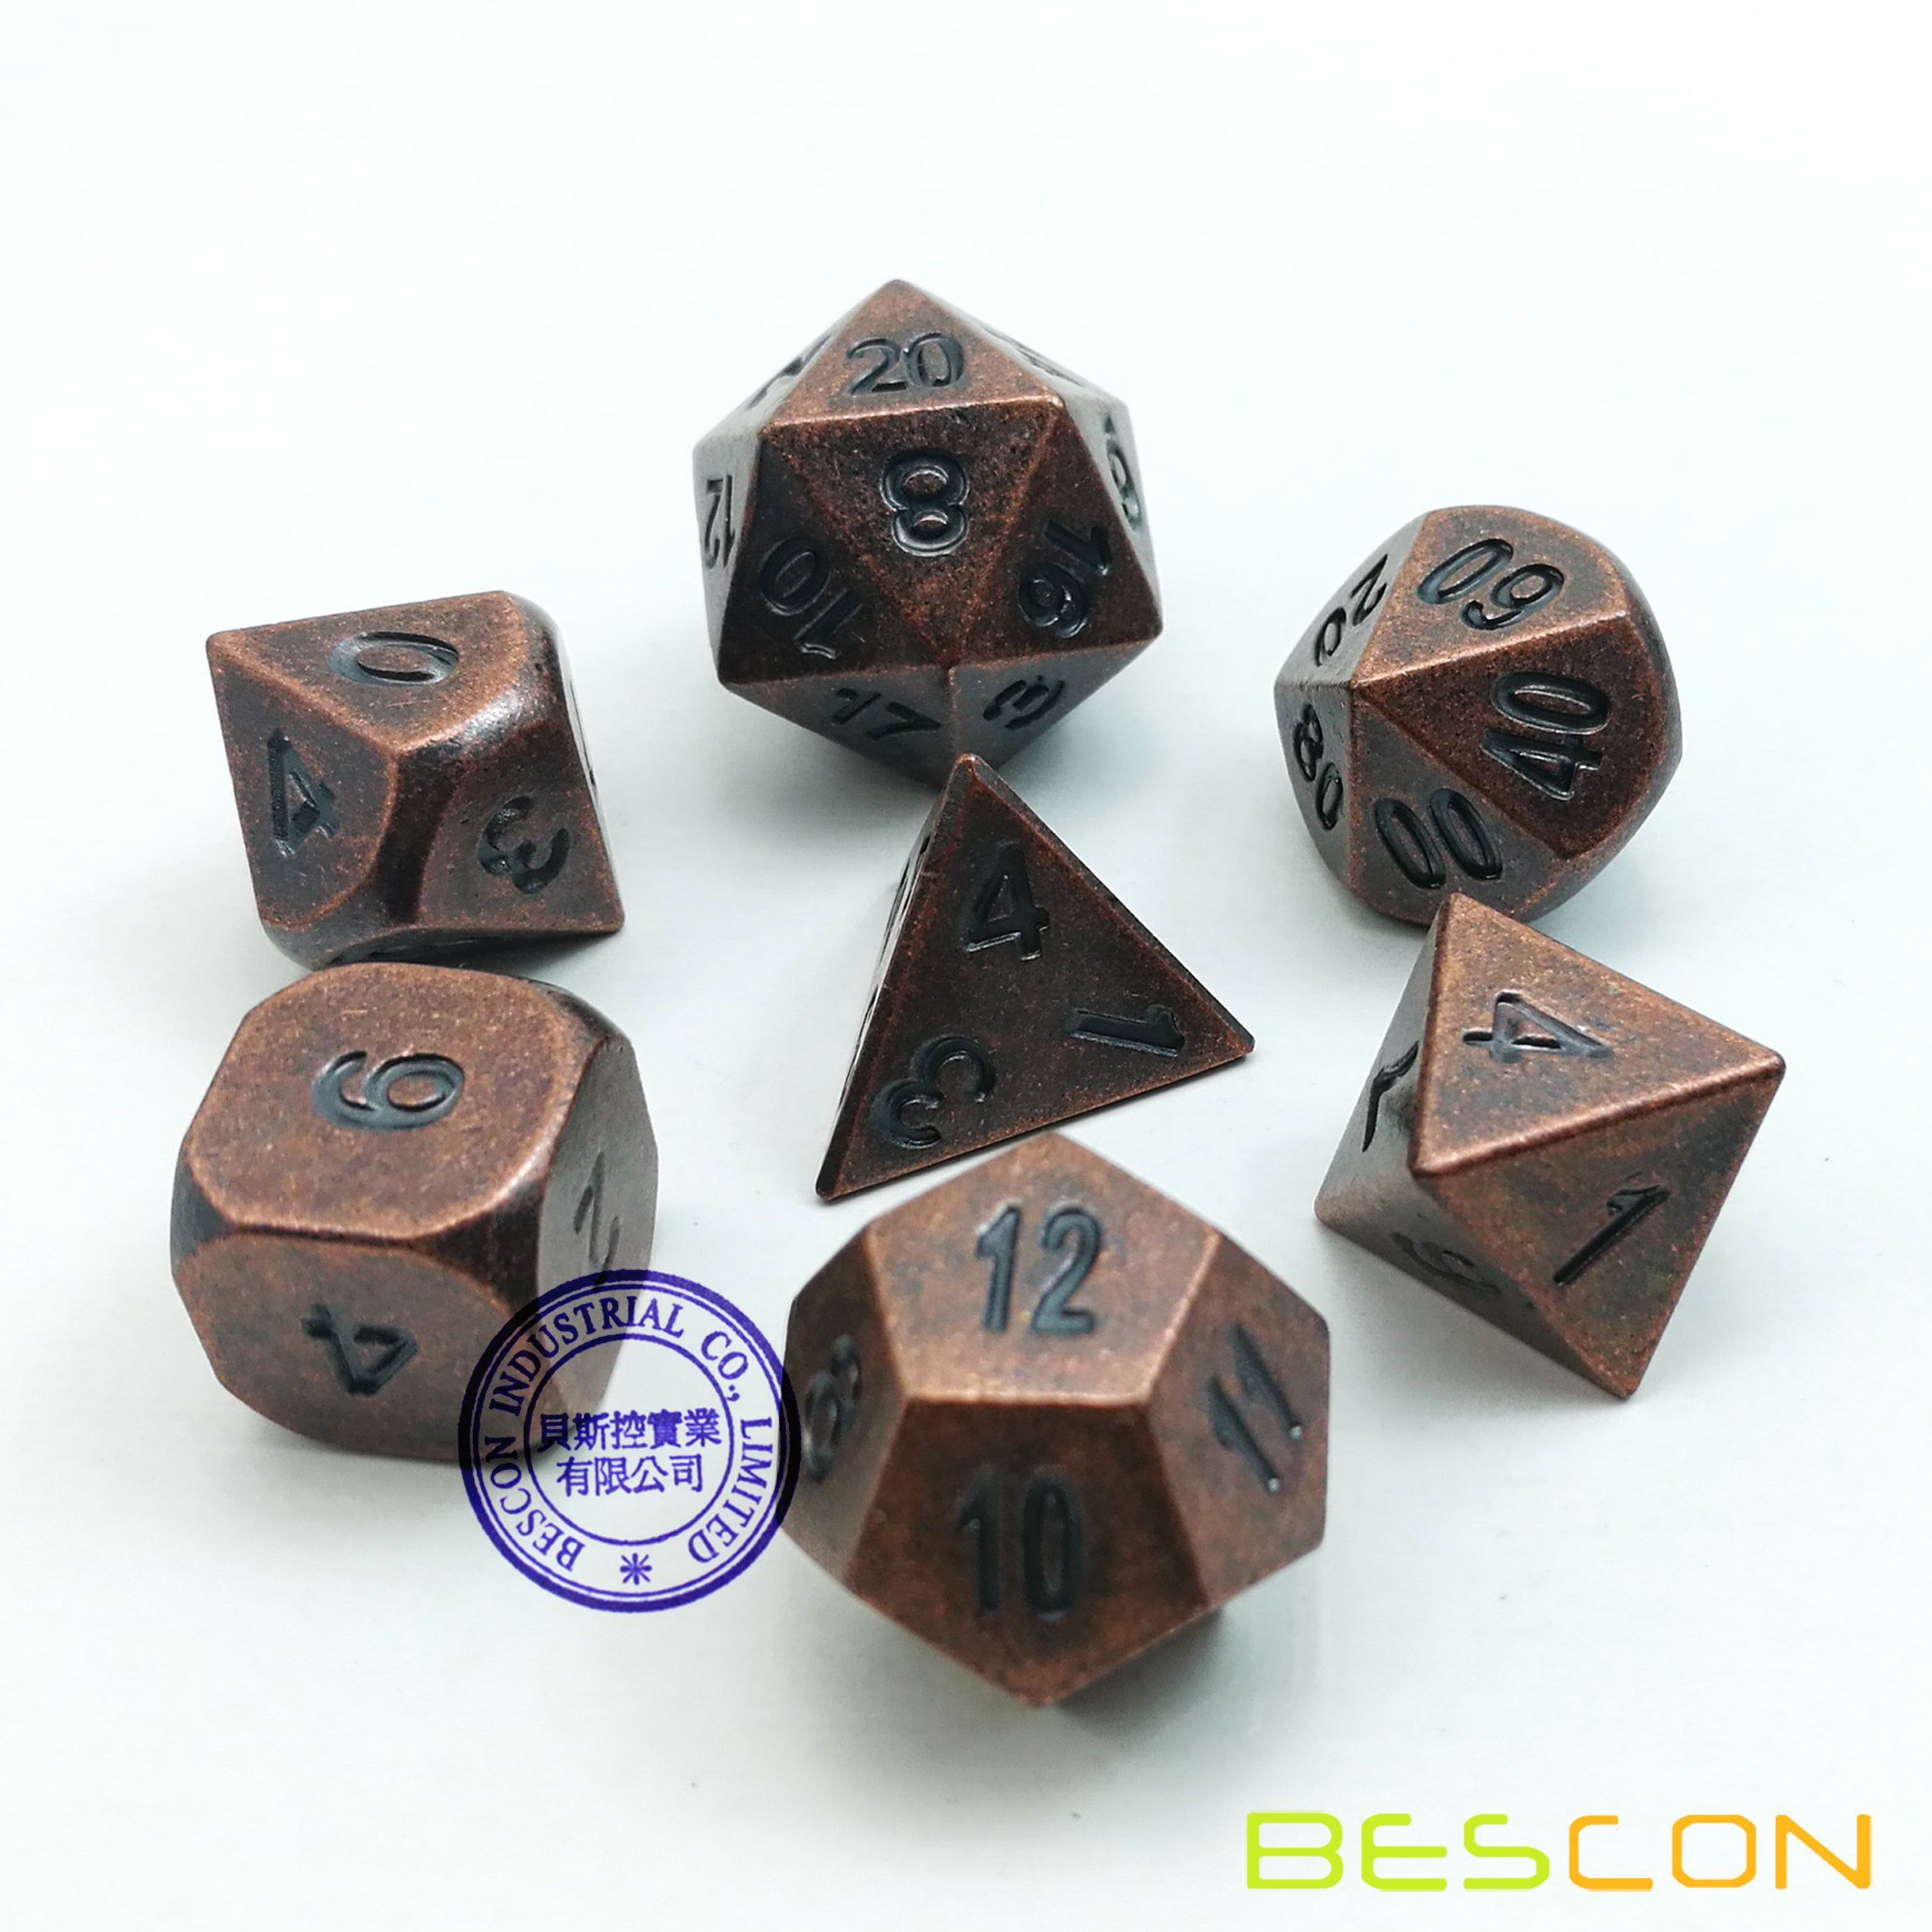 7Pcs/Set Antique Metal Polyhedral Dice Poker Car Role Playing Game Party W/ Bag 